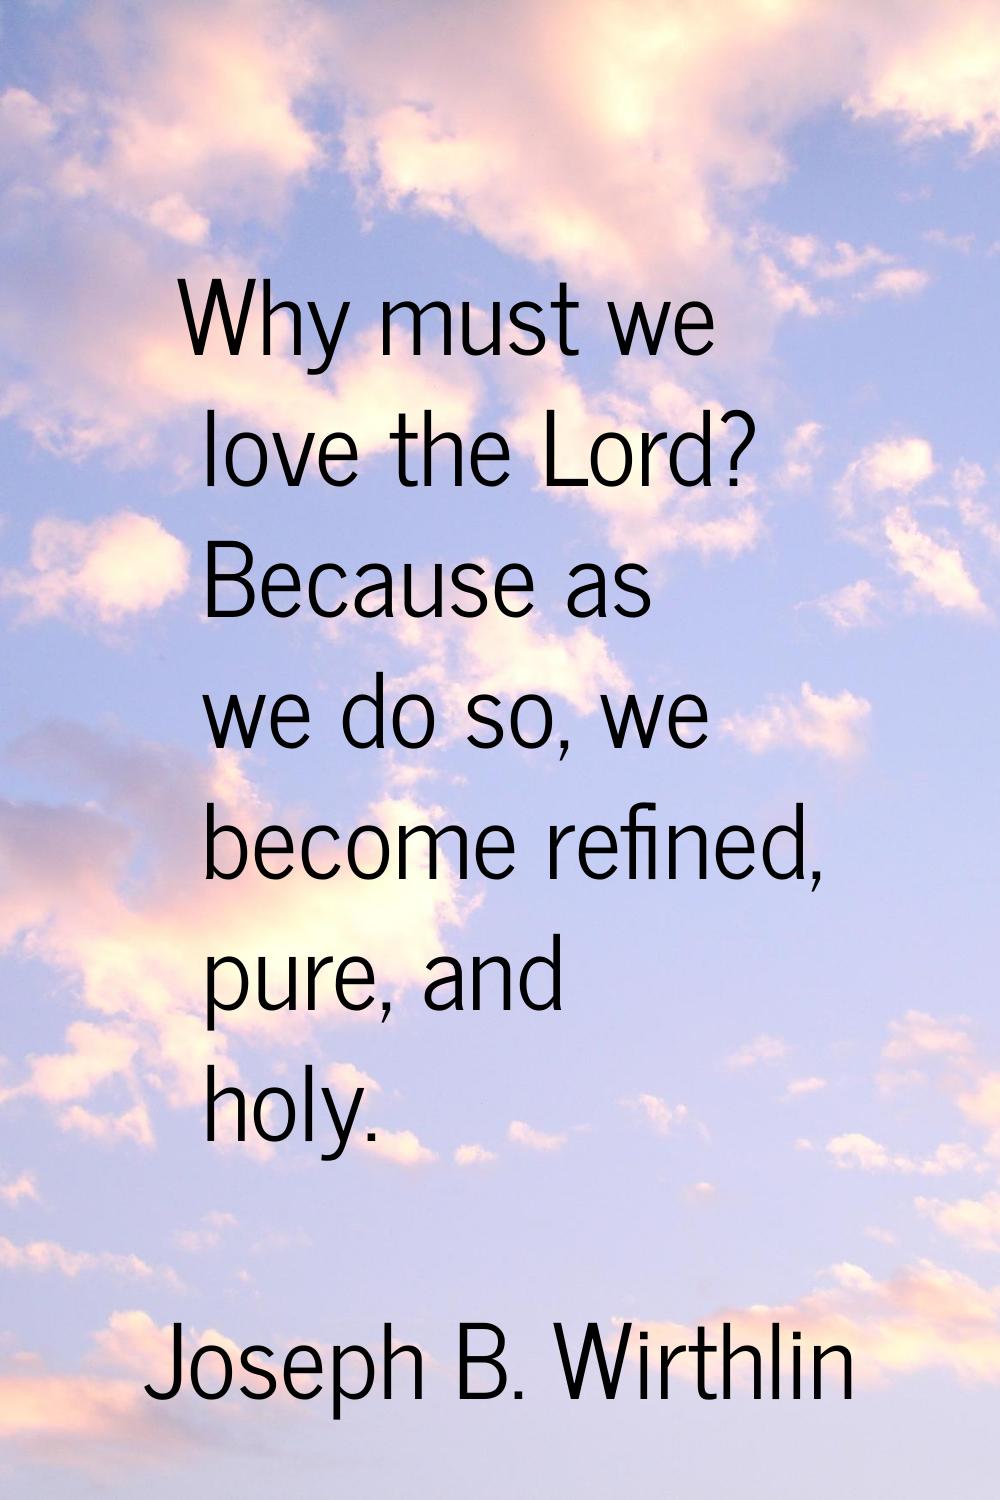 Why must we love the Lord? Because as we do so, we become refined, pure, and holy.